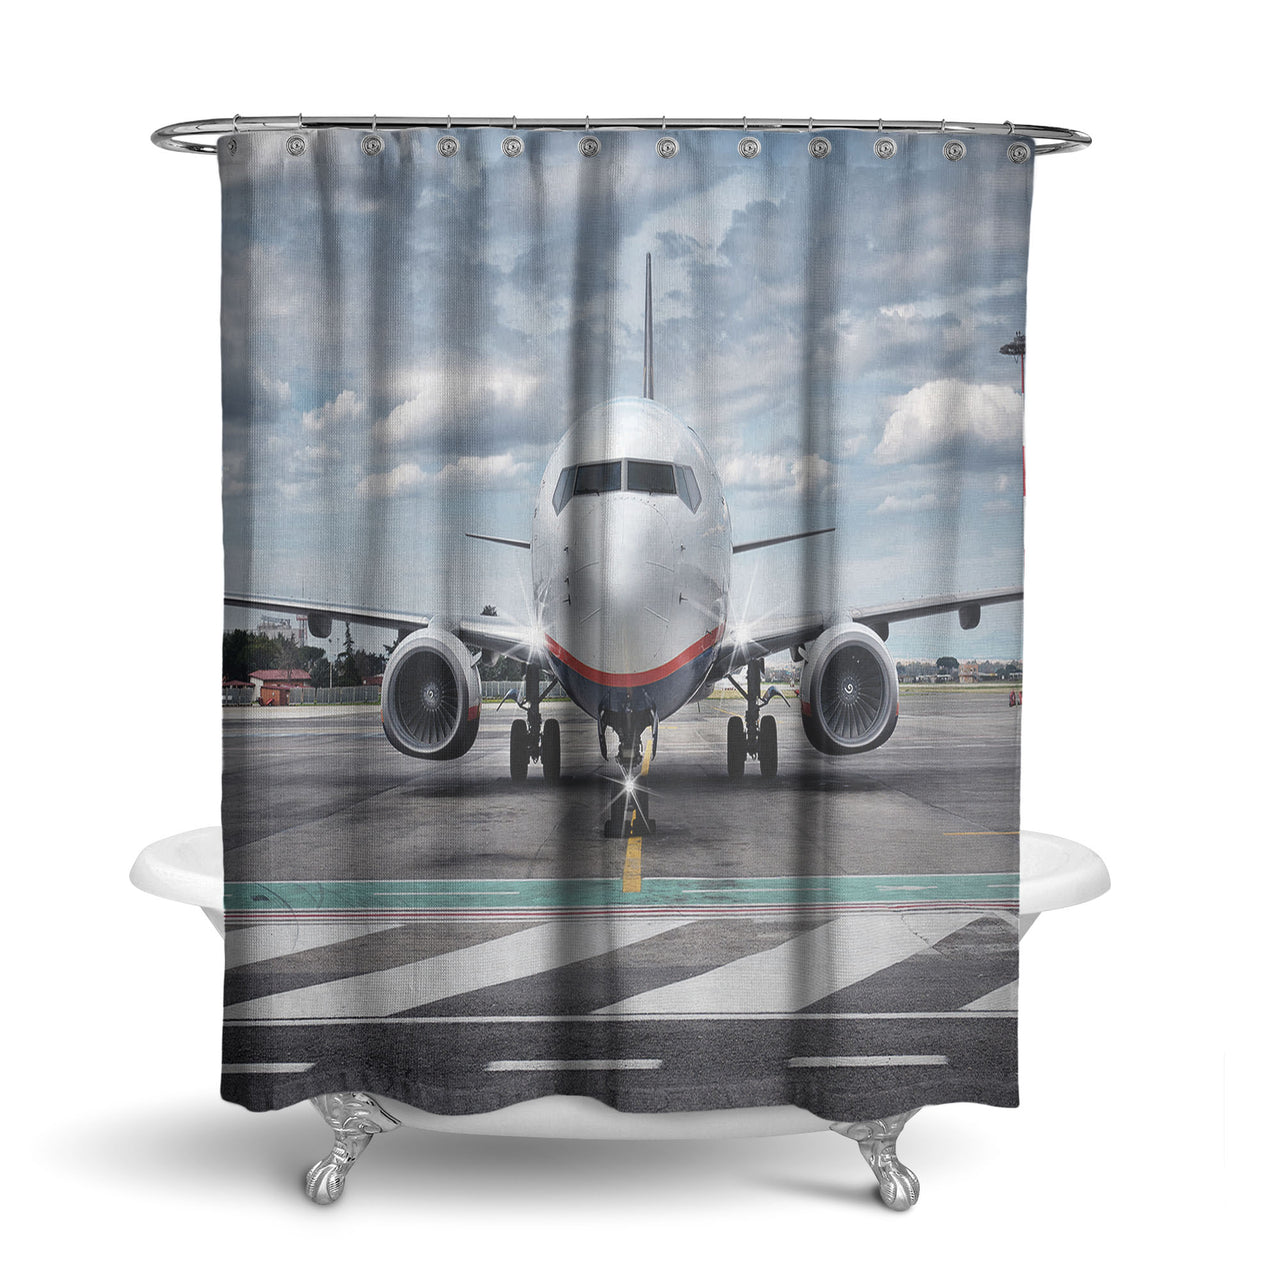 Amazing Clouds and Boeing 737 NG Designed Shower Curtains